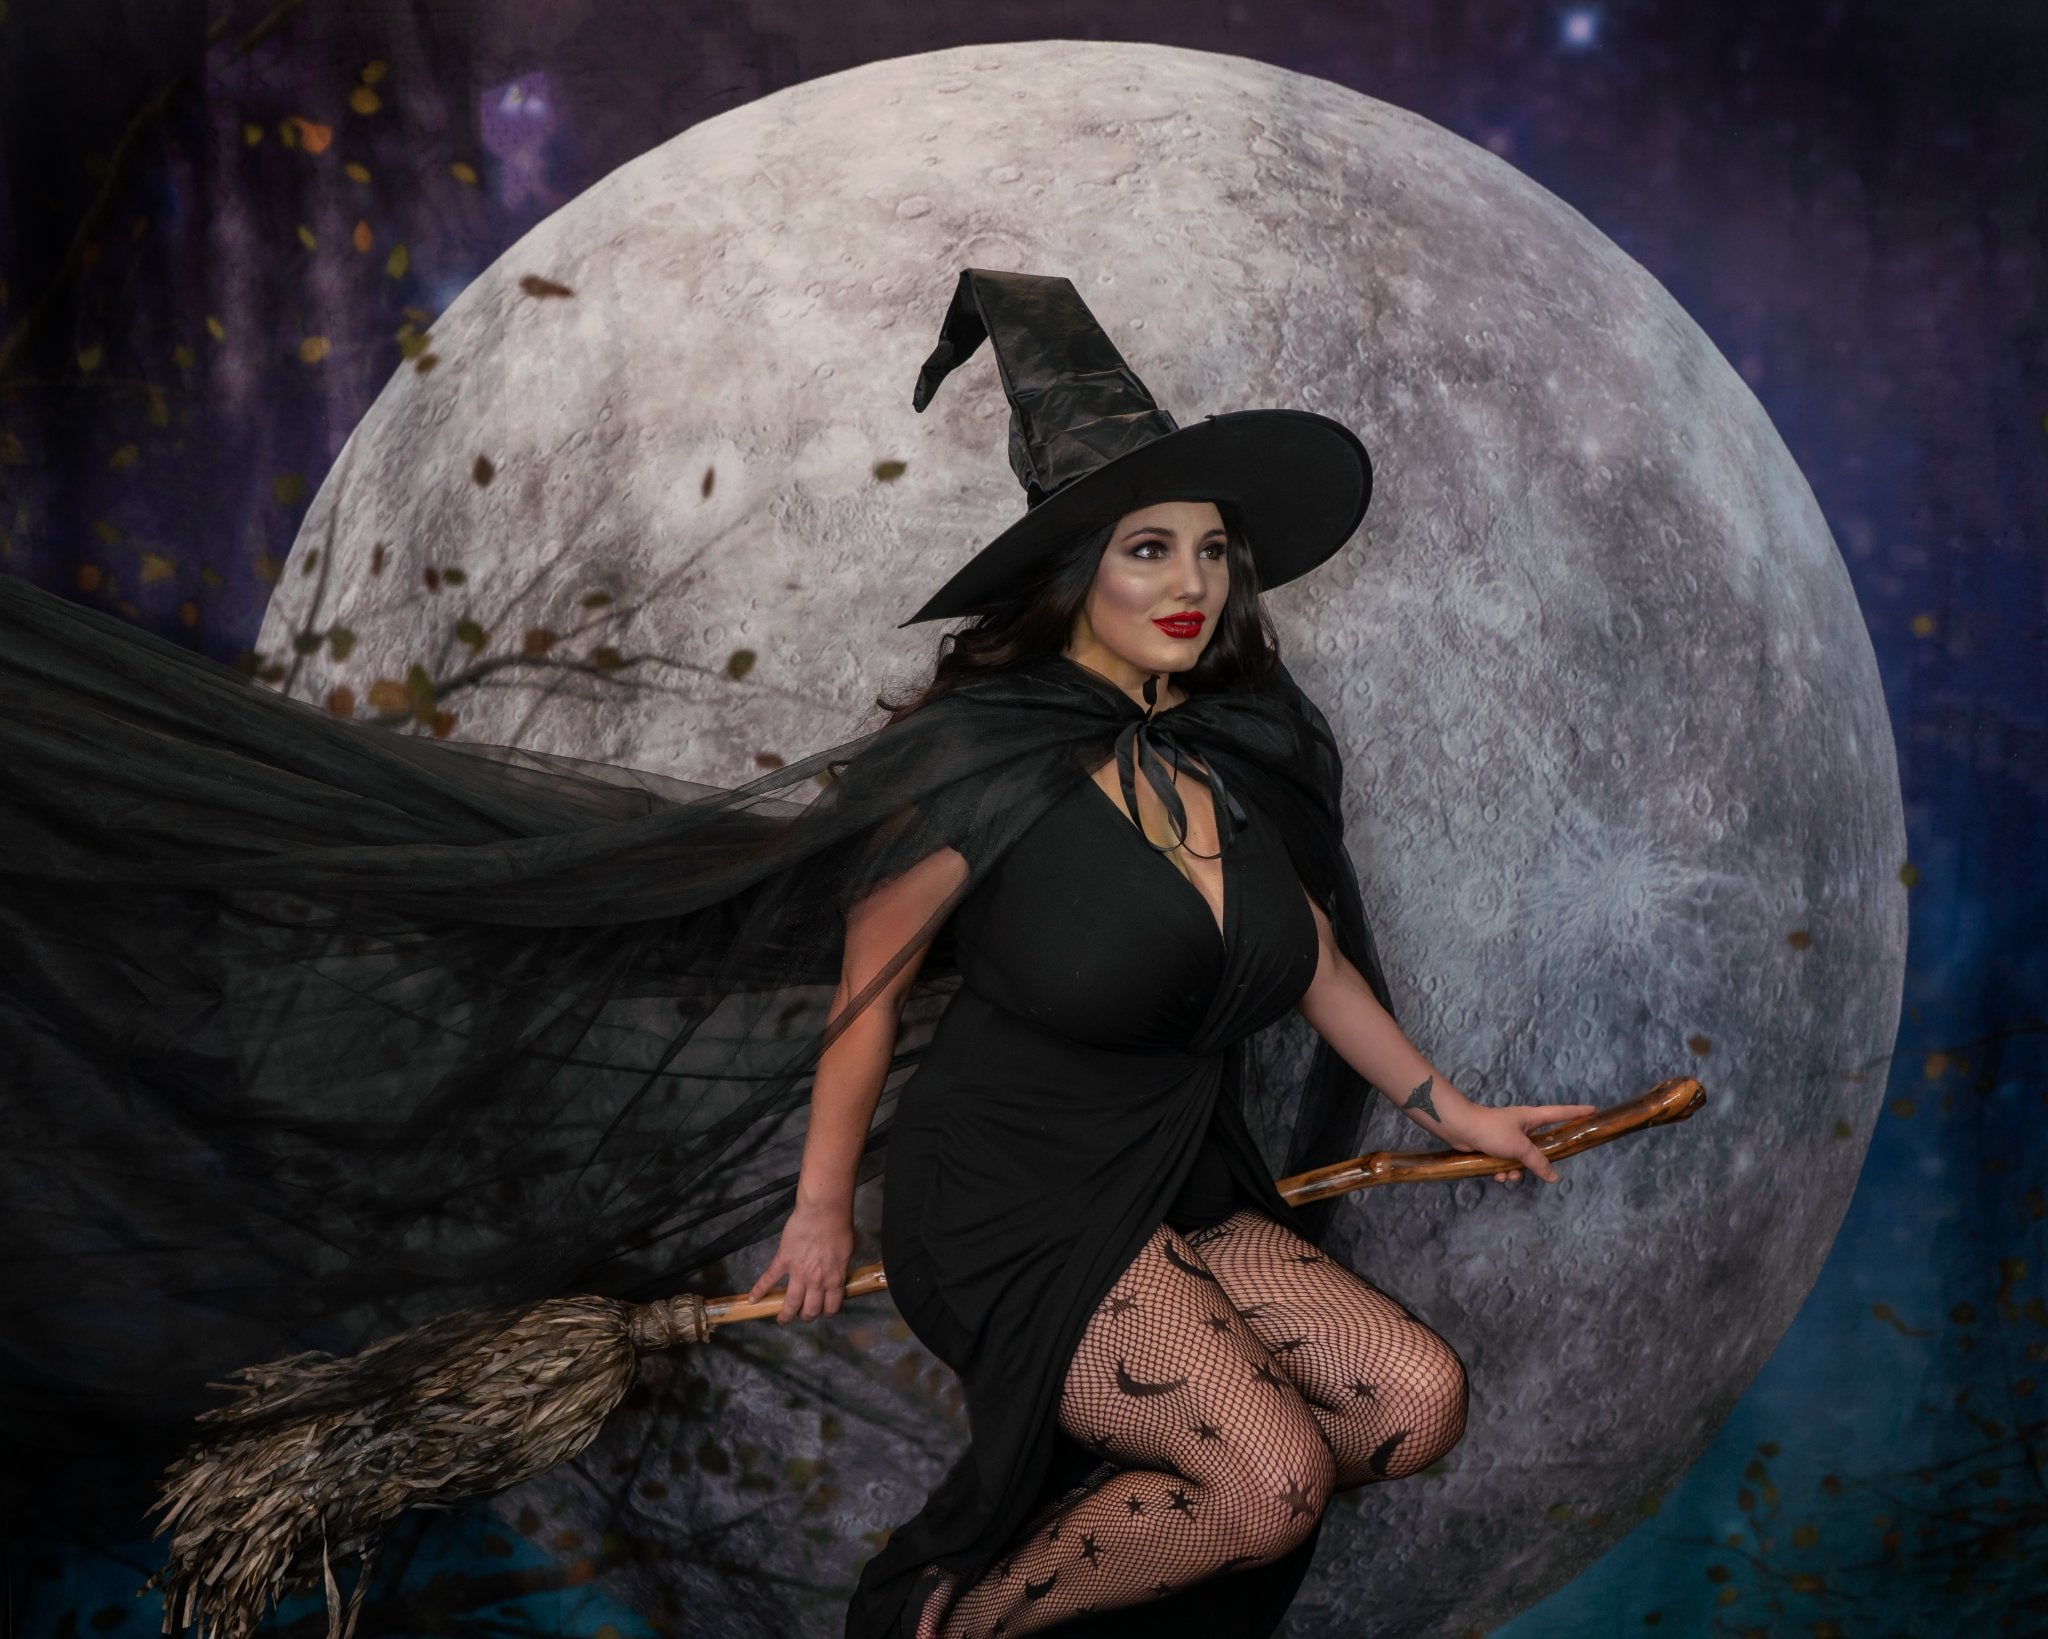 Kate Halloween Autumn Moon Backdrop Designed by Candice Compton